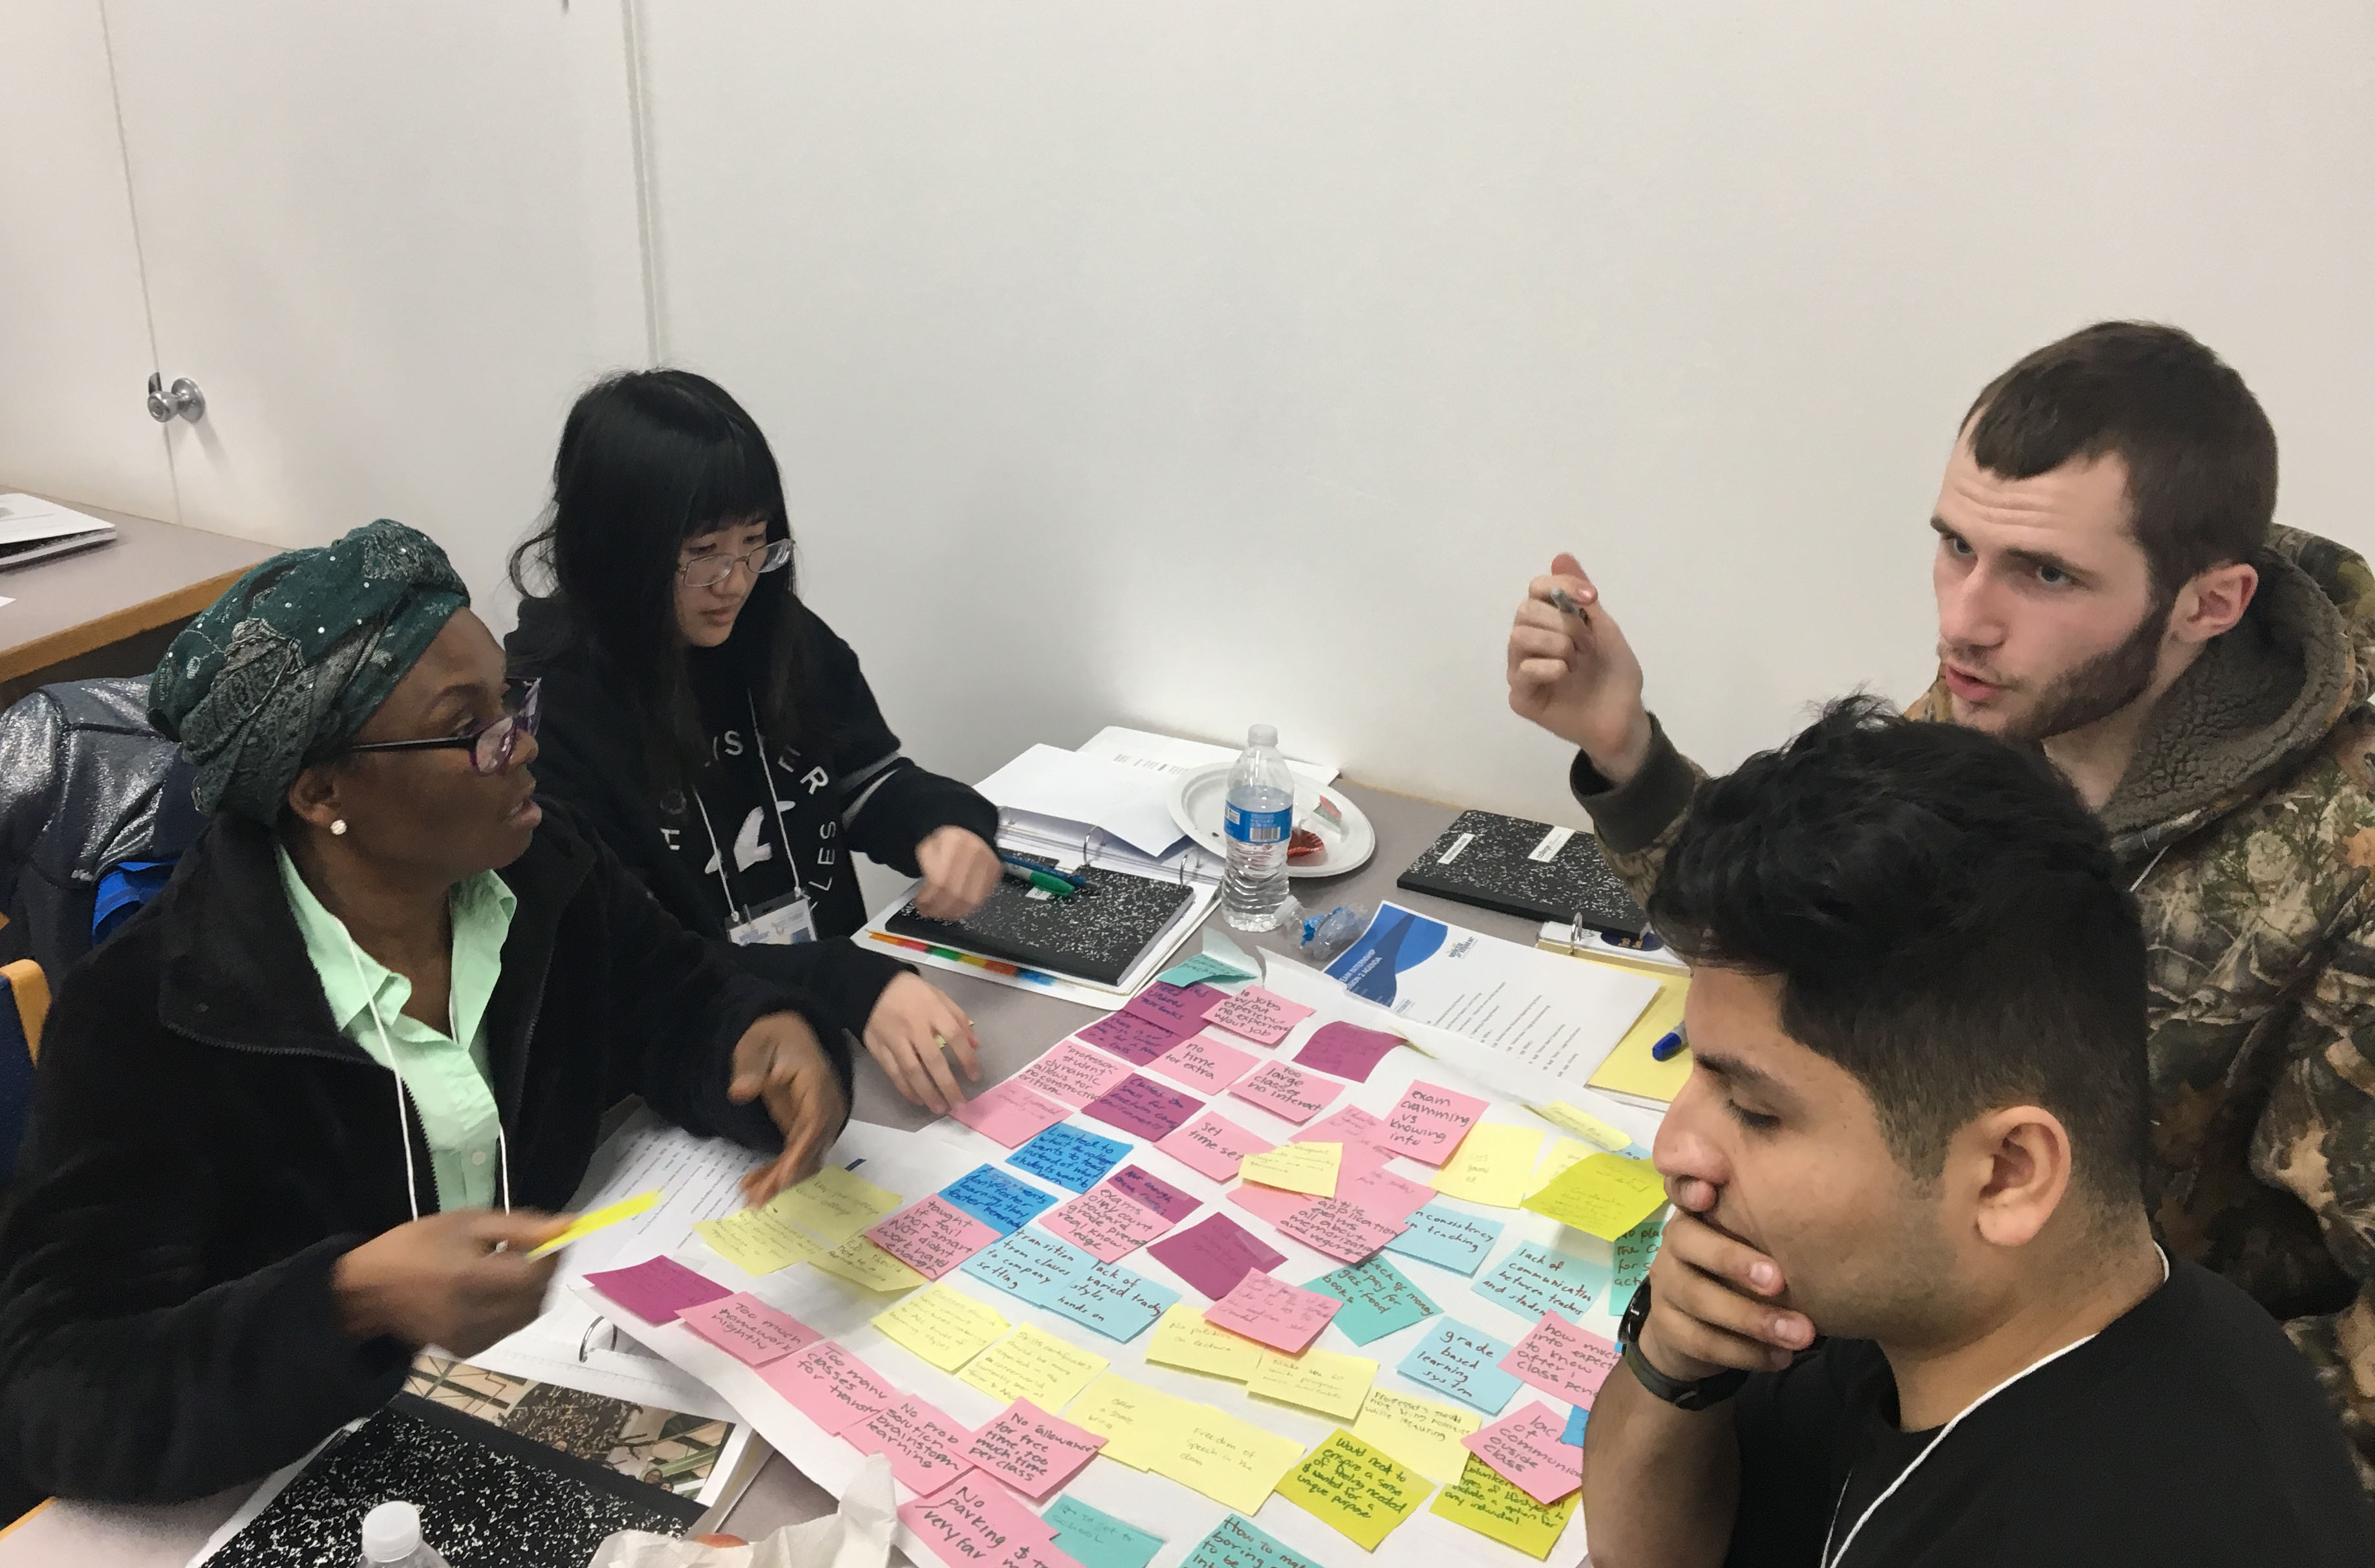 Sierra College students sort ideas during Makermatic team internship activity to define the problems for the business challenge.